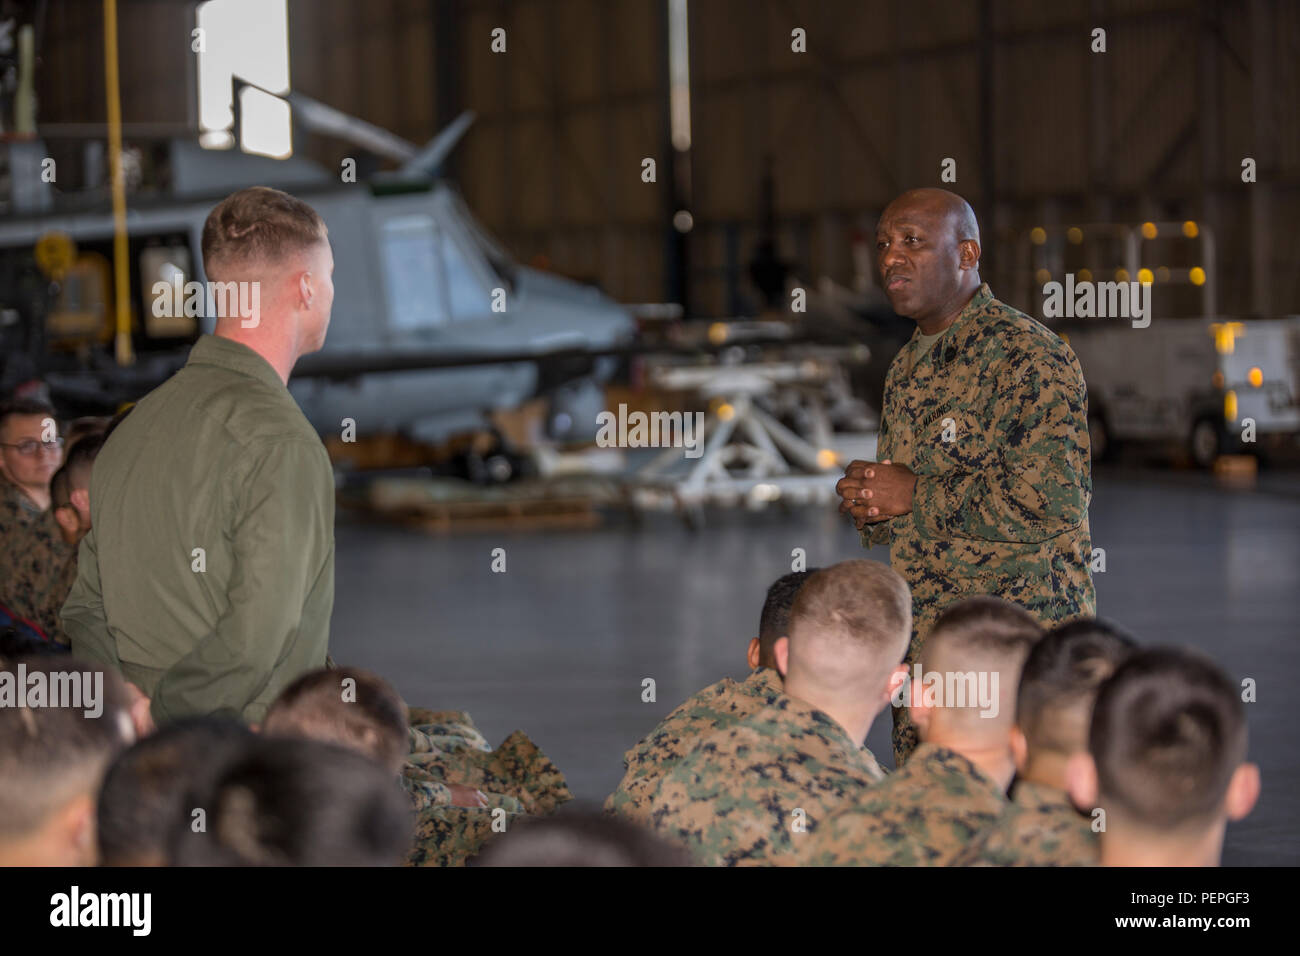 Sergeant Major of the Marine Corps, Sgt. Maj. Ronald L. Green, addressed Marines stationed at Naval Air Station Joint Reserve Base, New Orleans Jan. 19, 2016. Sgt. Maj. Green exchanged stories with the Marines of their time while serving in the Corps and how they to got where they are today. Sgt. Maj. Green commended Marines for their hard work, encouraged them to protect what they’ve earned as a Marine, and emphasized the importance of upholding the standards of the Corps on and off duty. Stock Photo